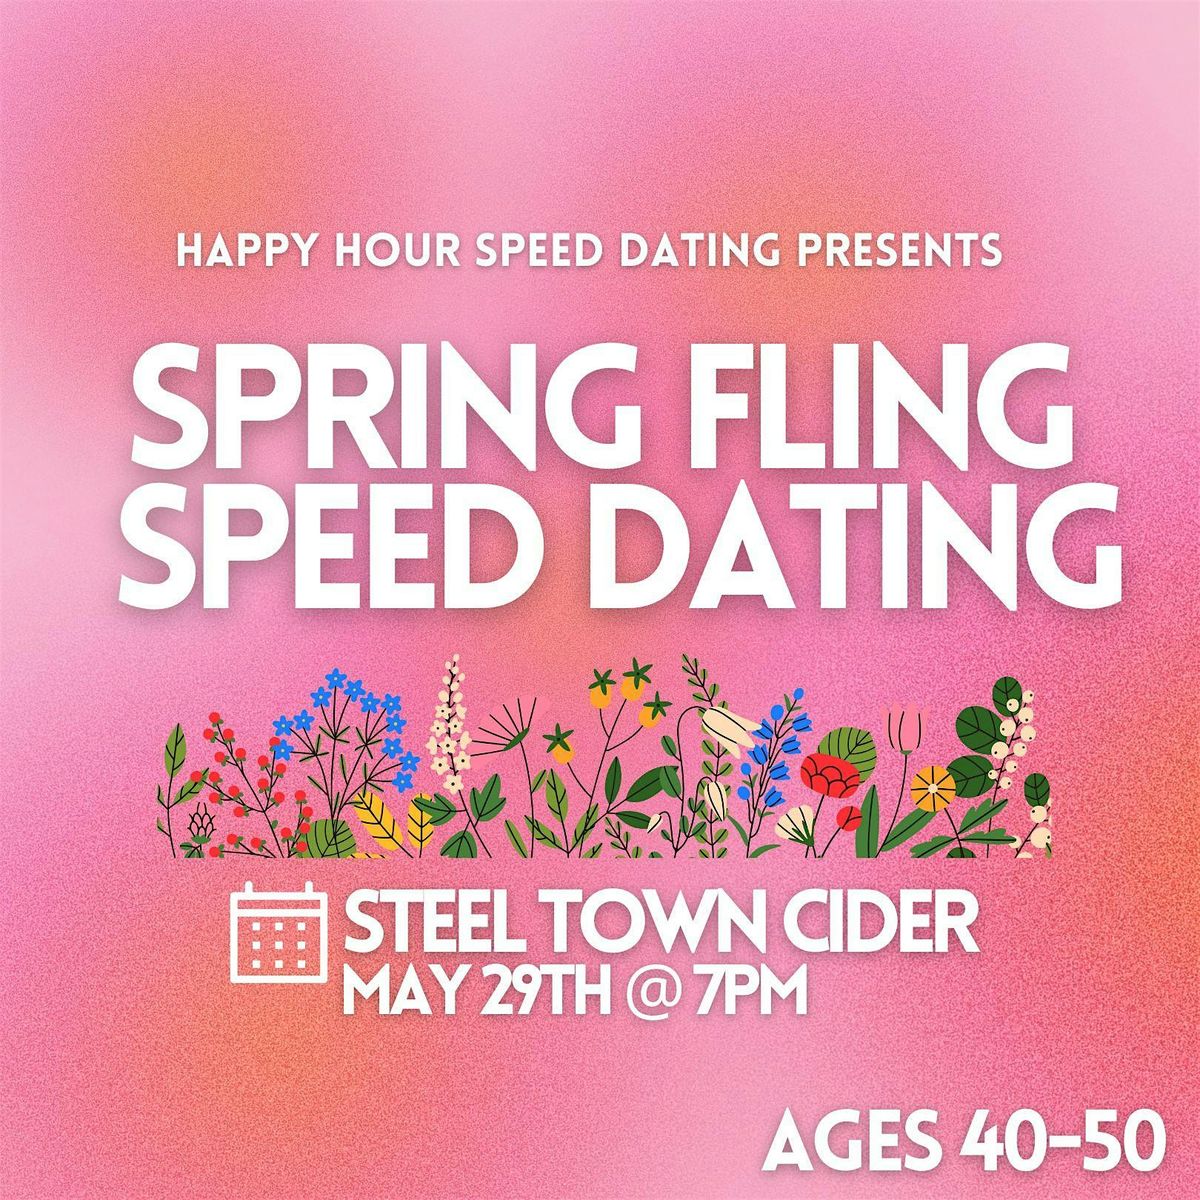 Spring Fling Speed Dating Ages 40-50 @Steel Town Cider (Hamilton)